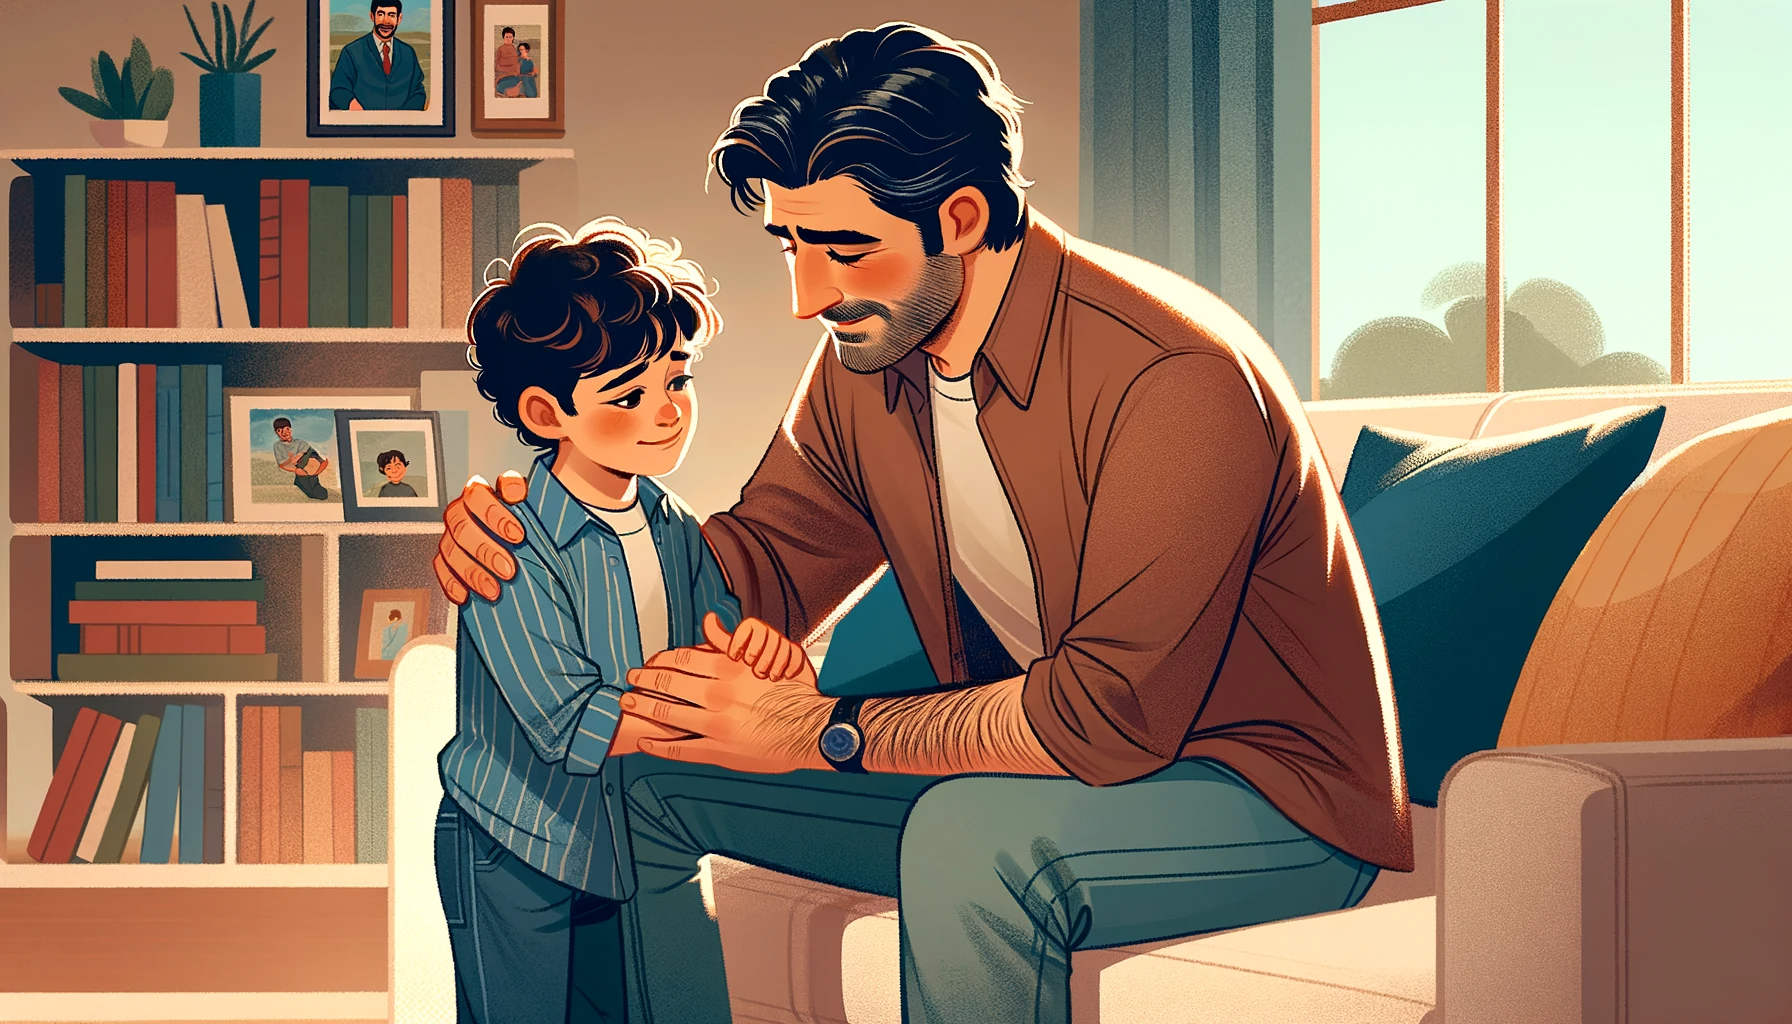 illustration of father supporting child